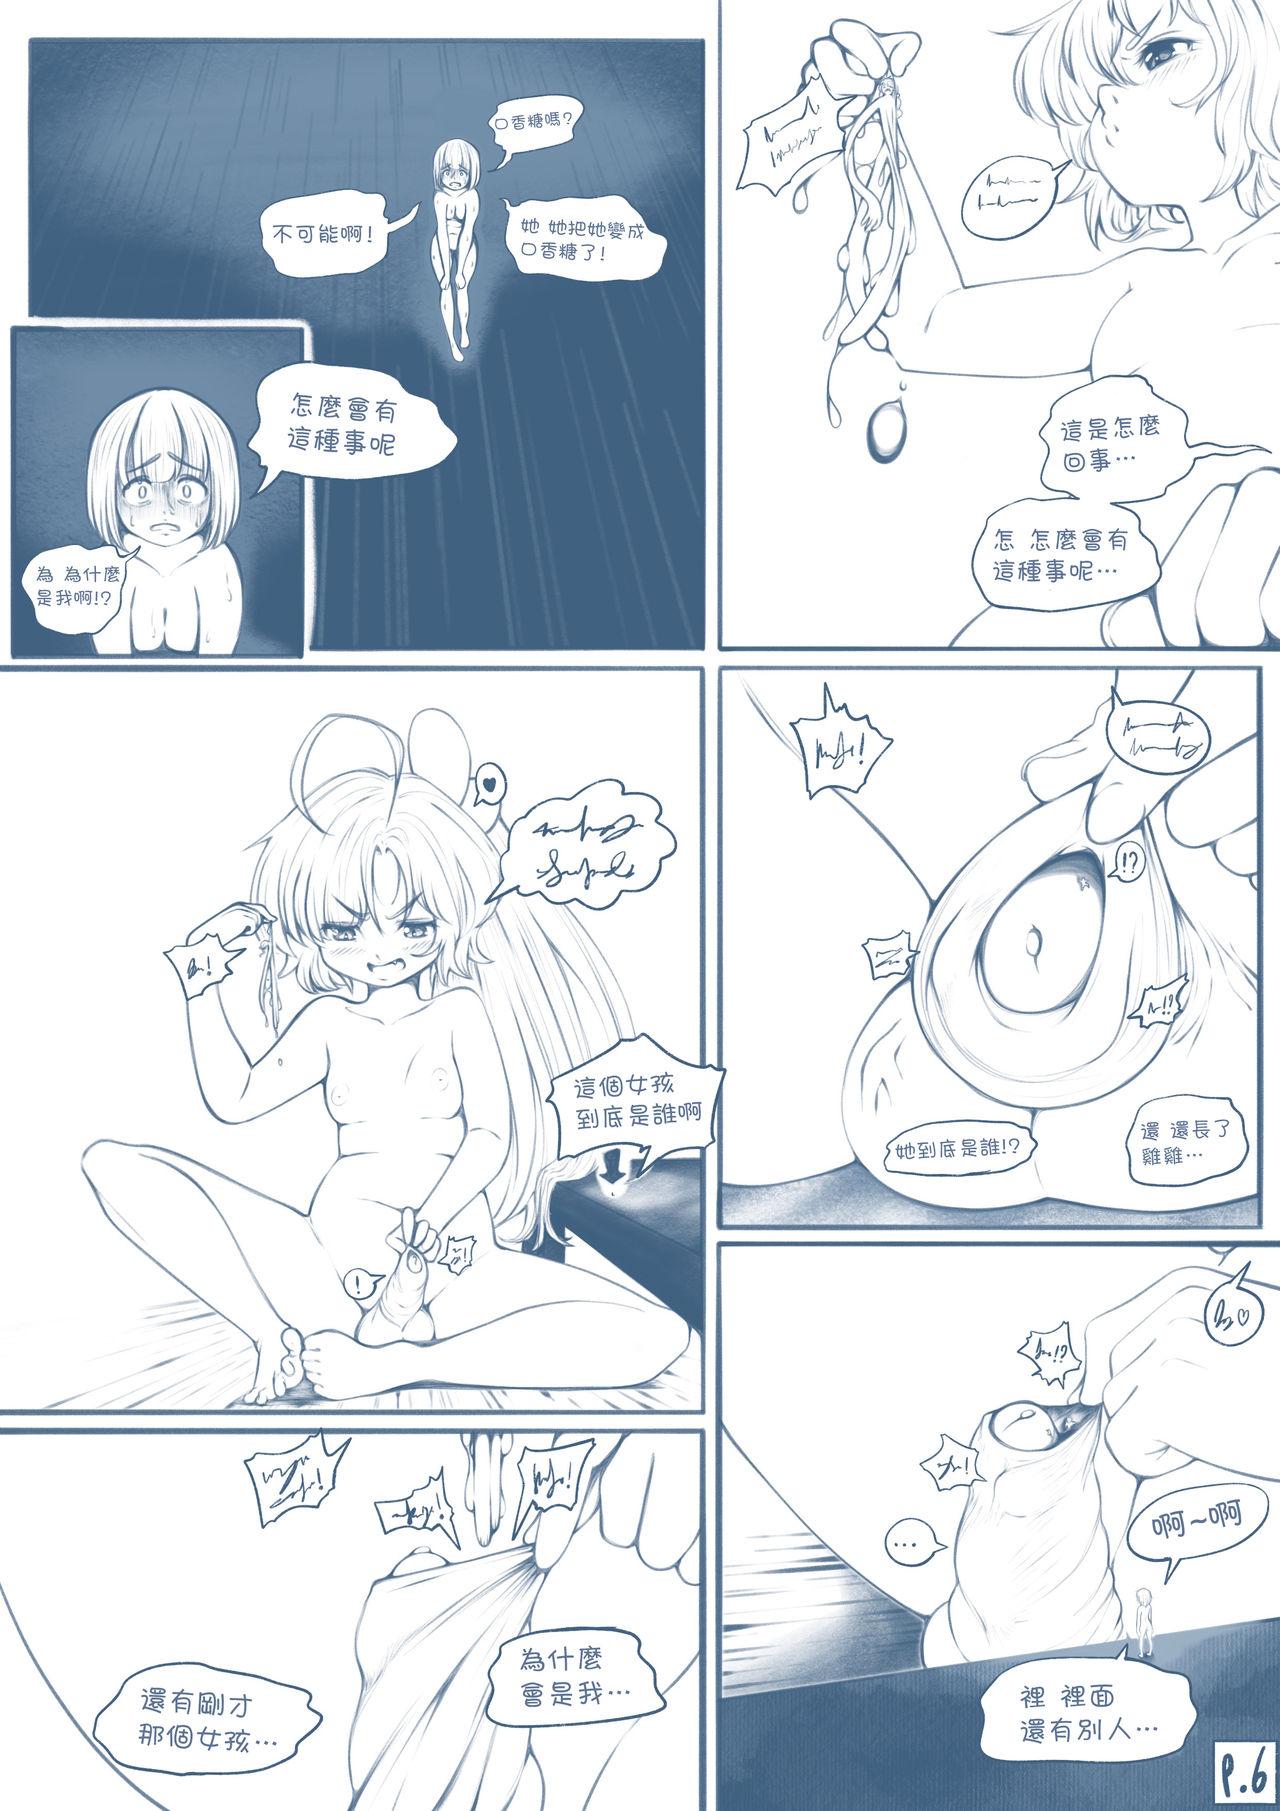 Bald Pussy The Loli Vampire part2 - Original Gonzo - Page 7